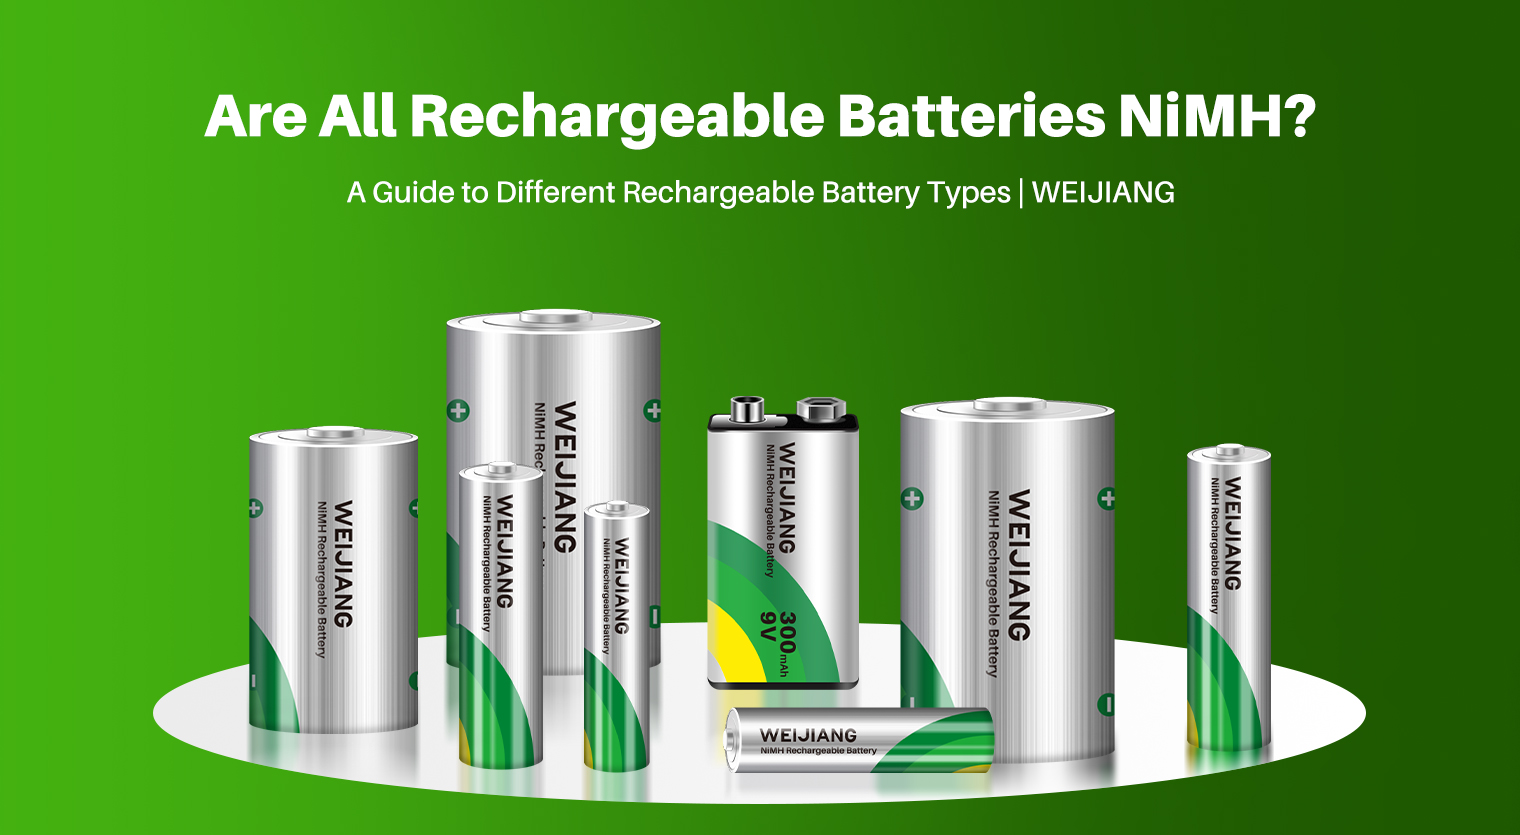 Are All Rechargeable Batteries NiMH? A Guide to Different Rechargeable Battery Types | WEIJIANG